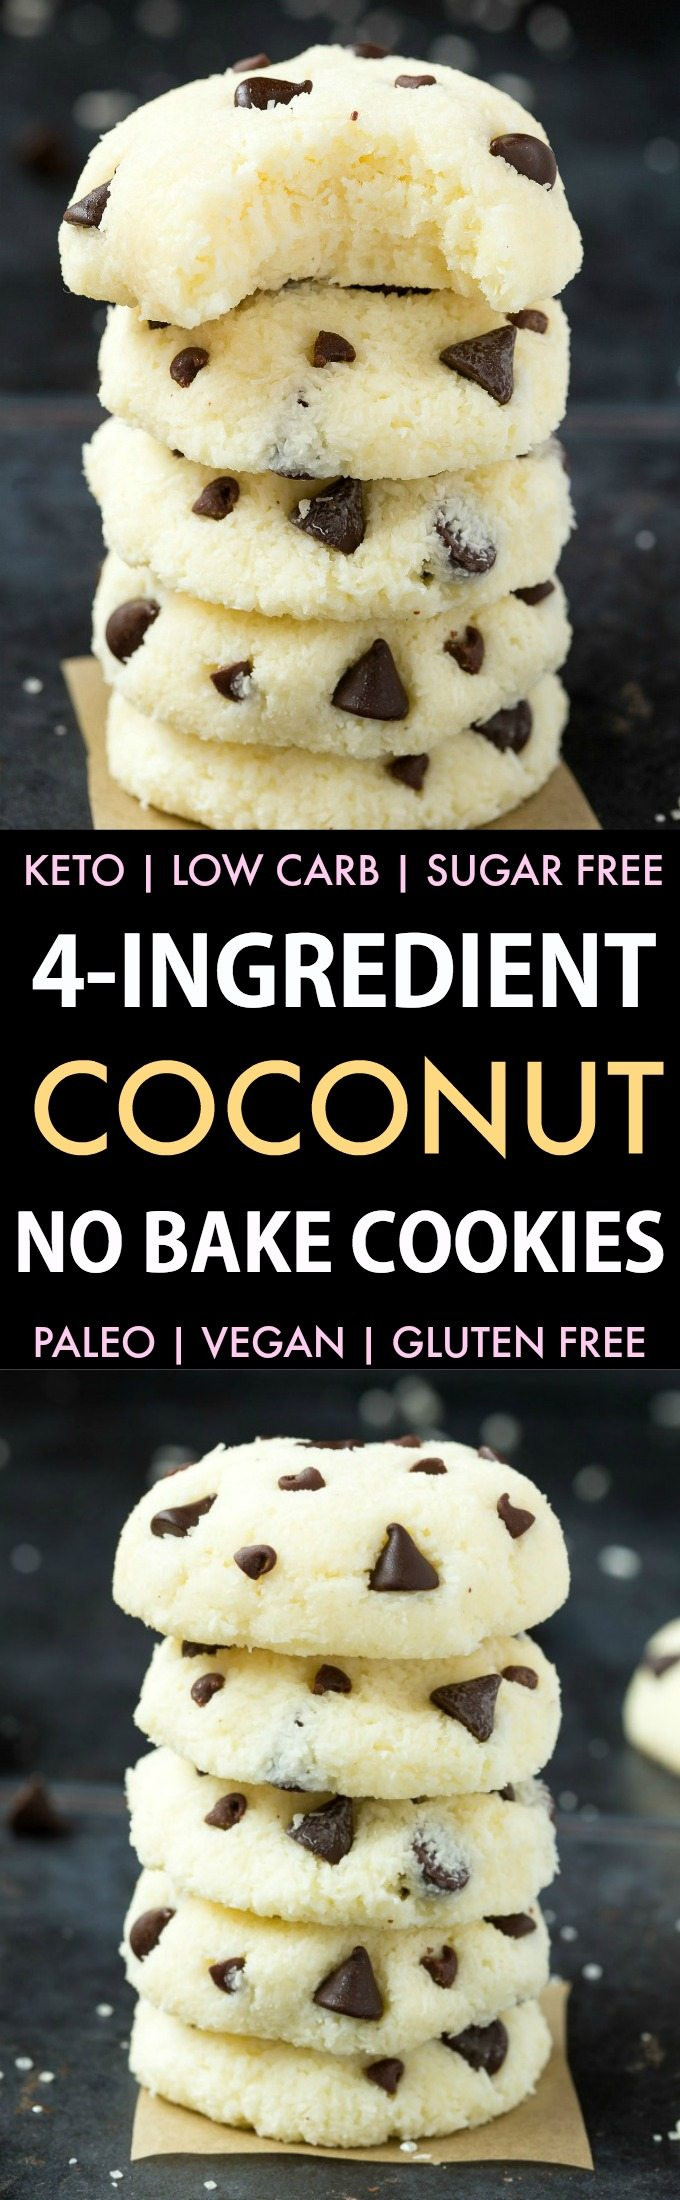 Keto No Bake Cookies Without Coconut
 4 Ingre nt Paleo Vegan Coconut No Bake Cookies Keto